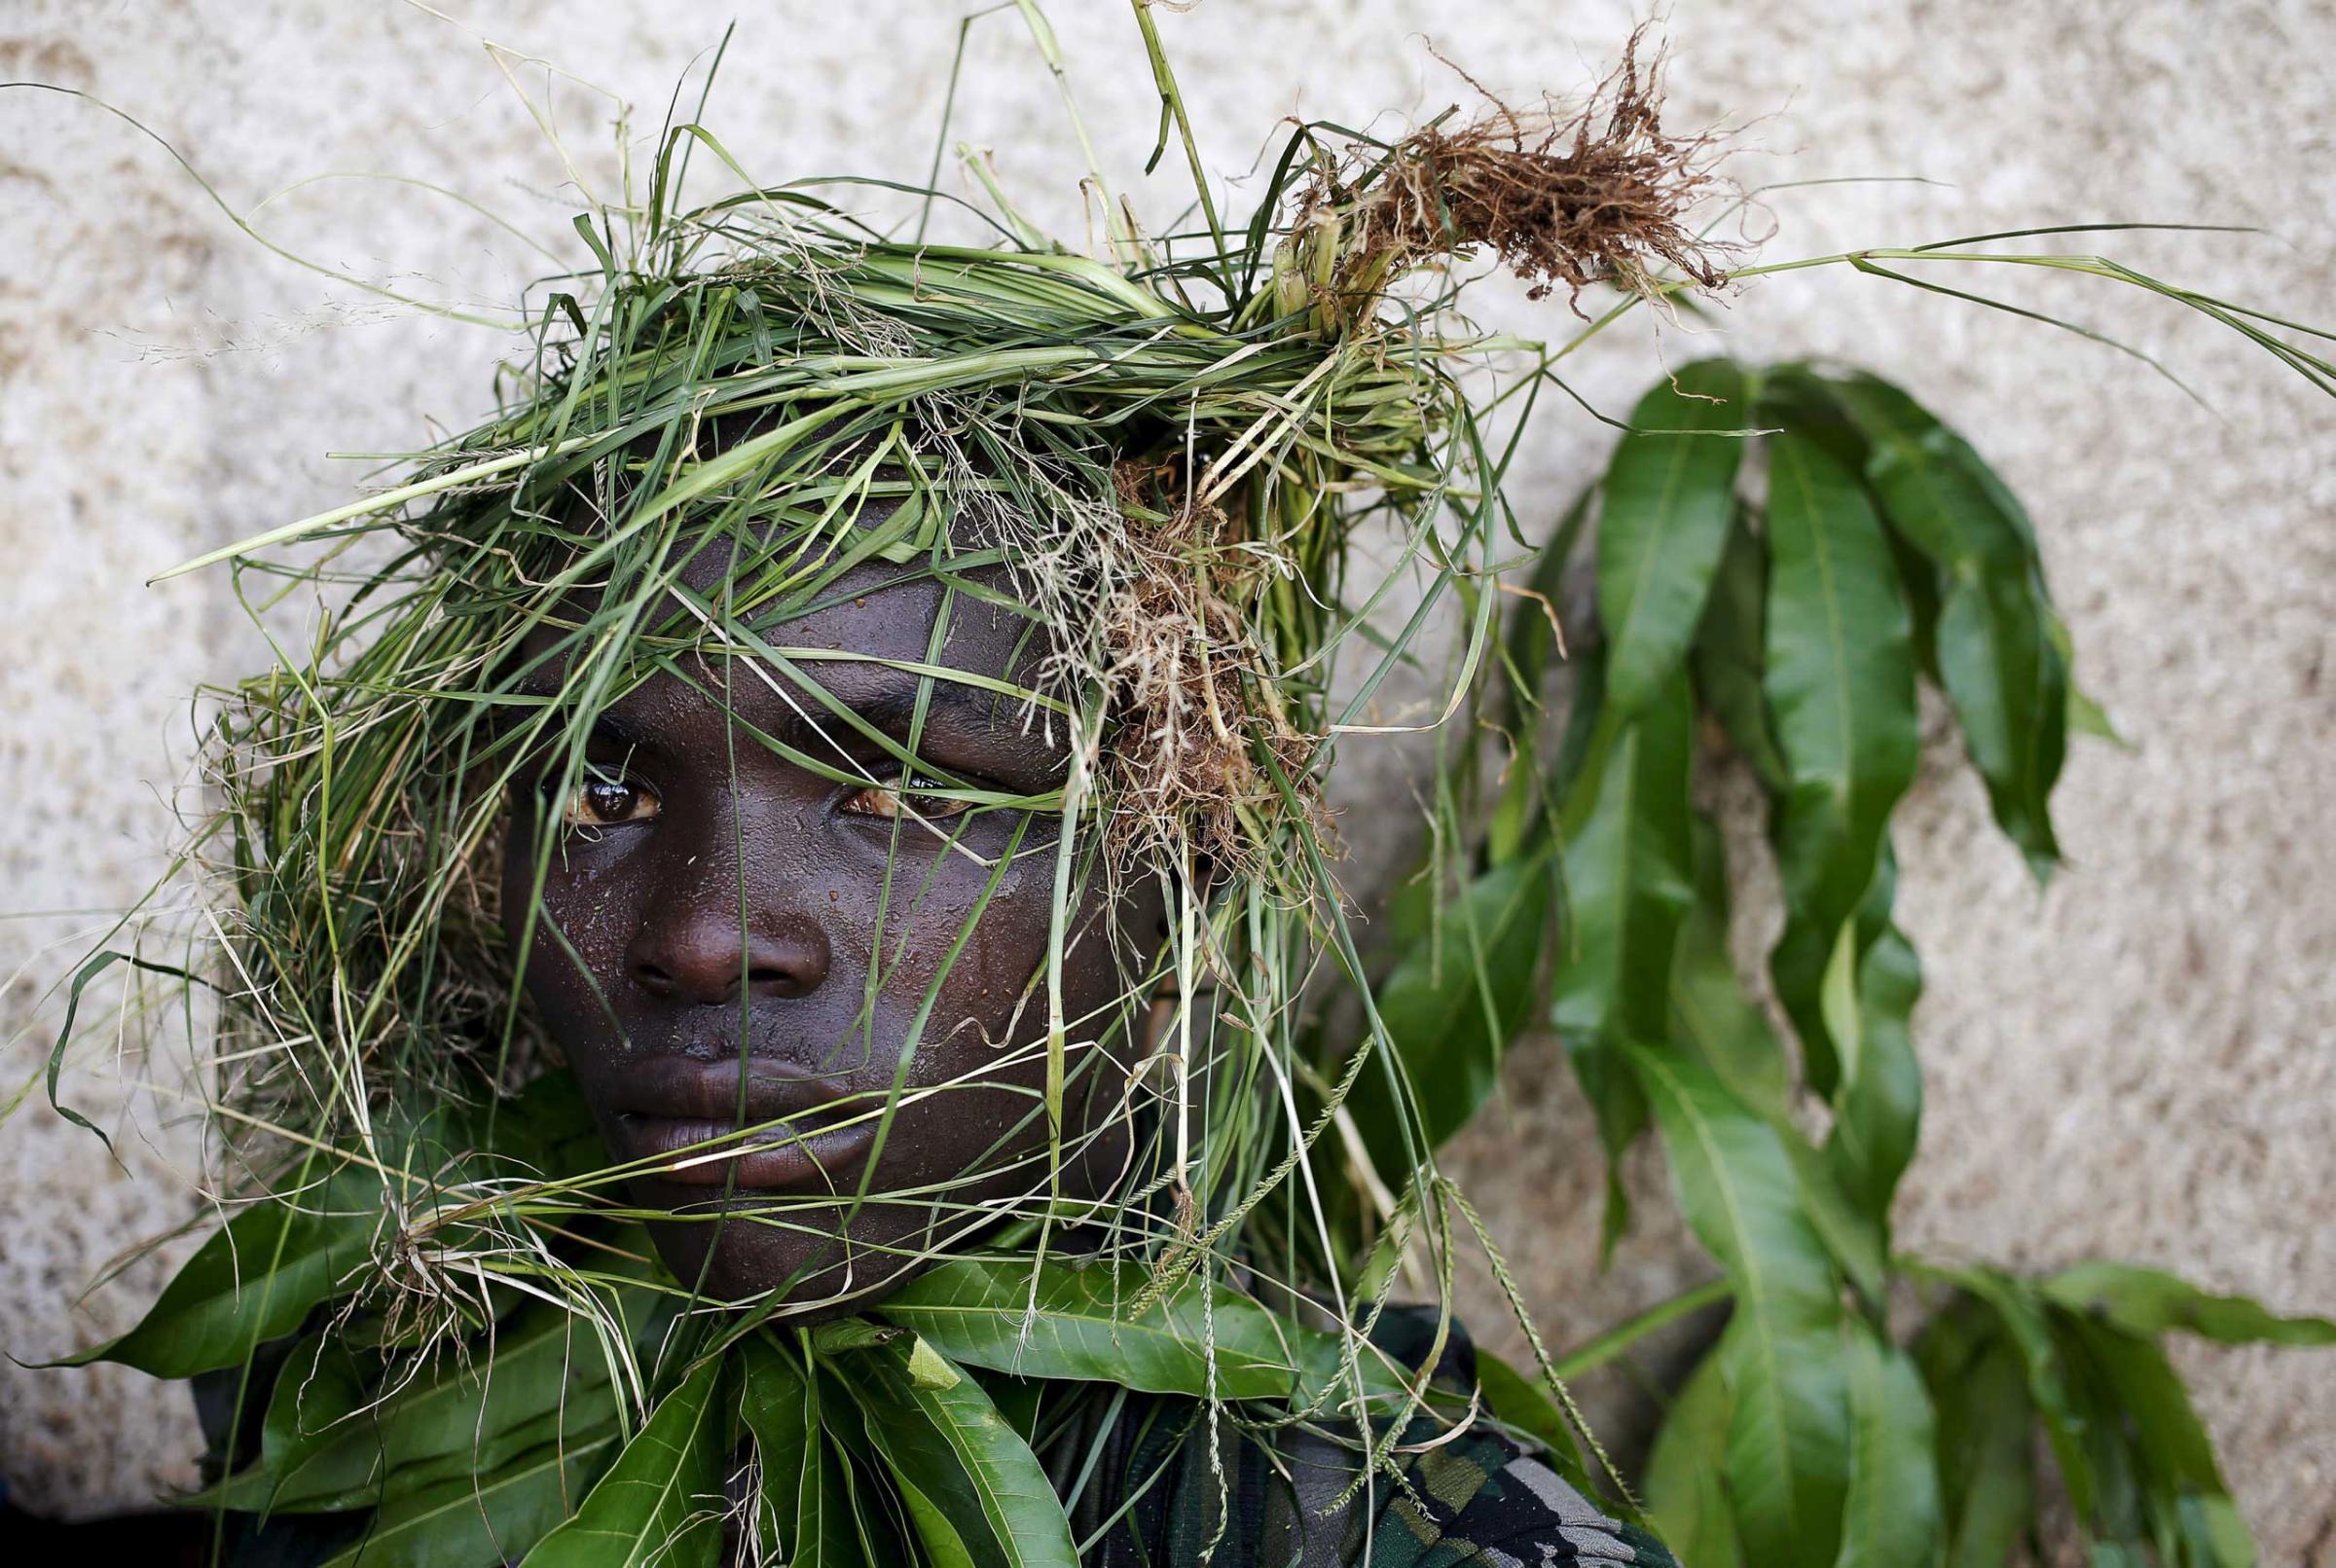 A protester wears grass around his face to obscure his identity during a protest against President Pierre Nkurunziza's decision to run for a third term, in Bujumbura, Burundi.